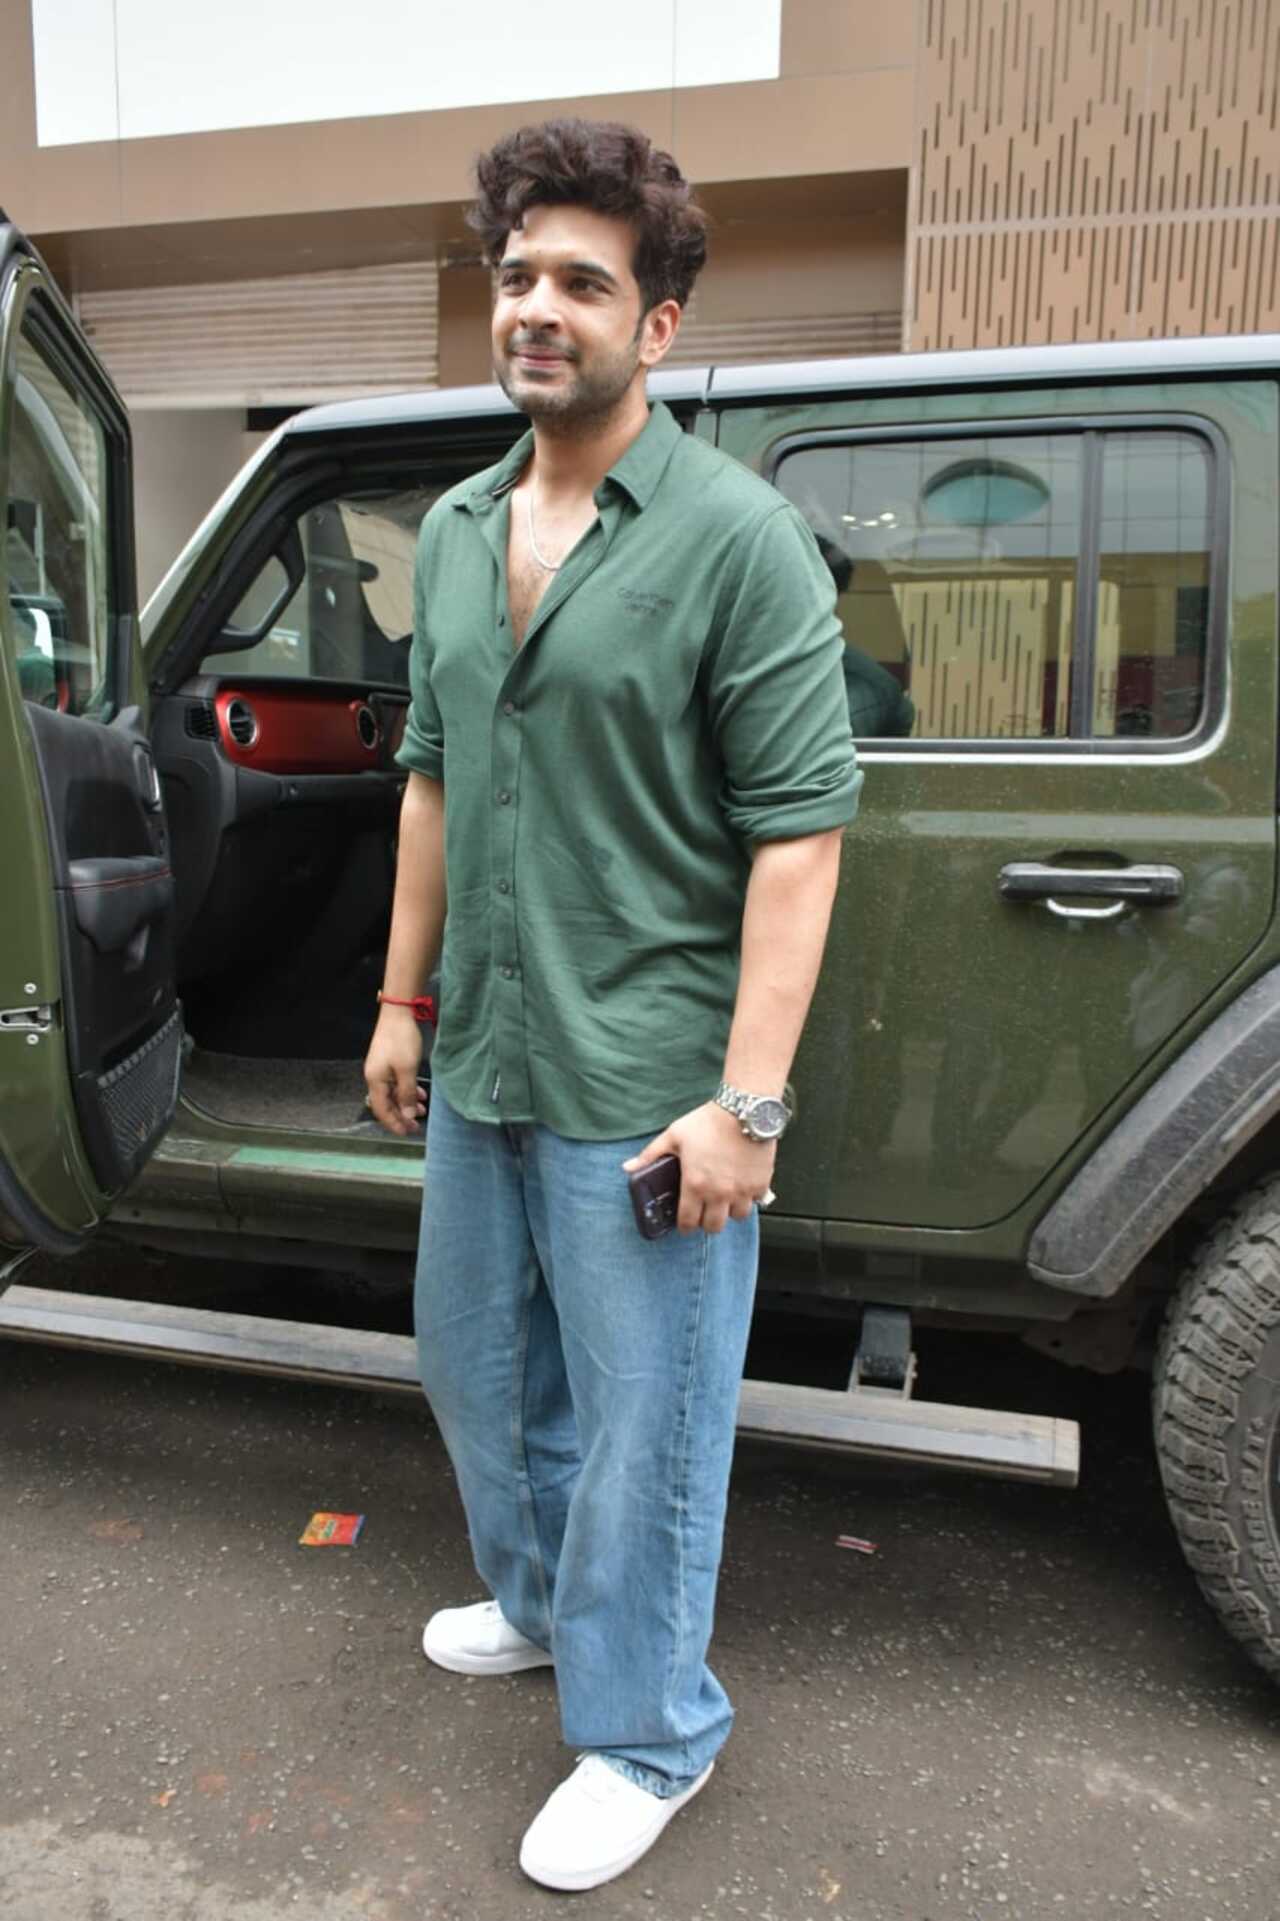 Karan was dressed in a green shirt and baggy jeans